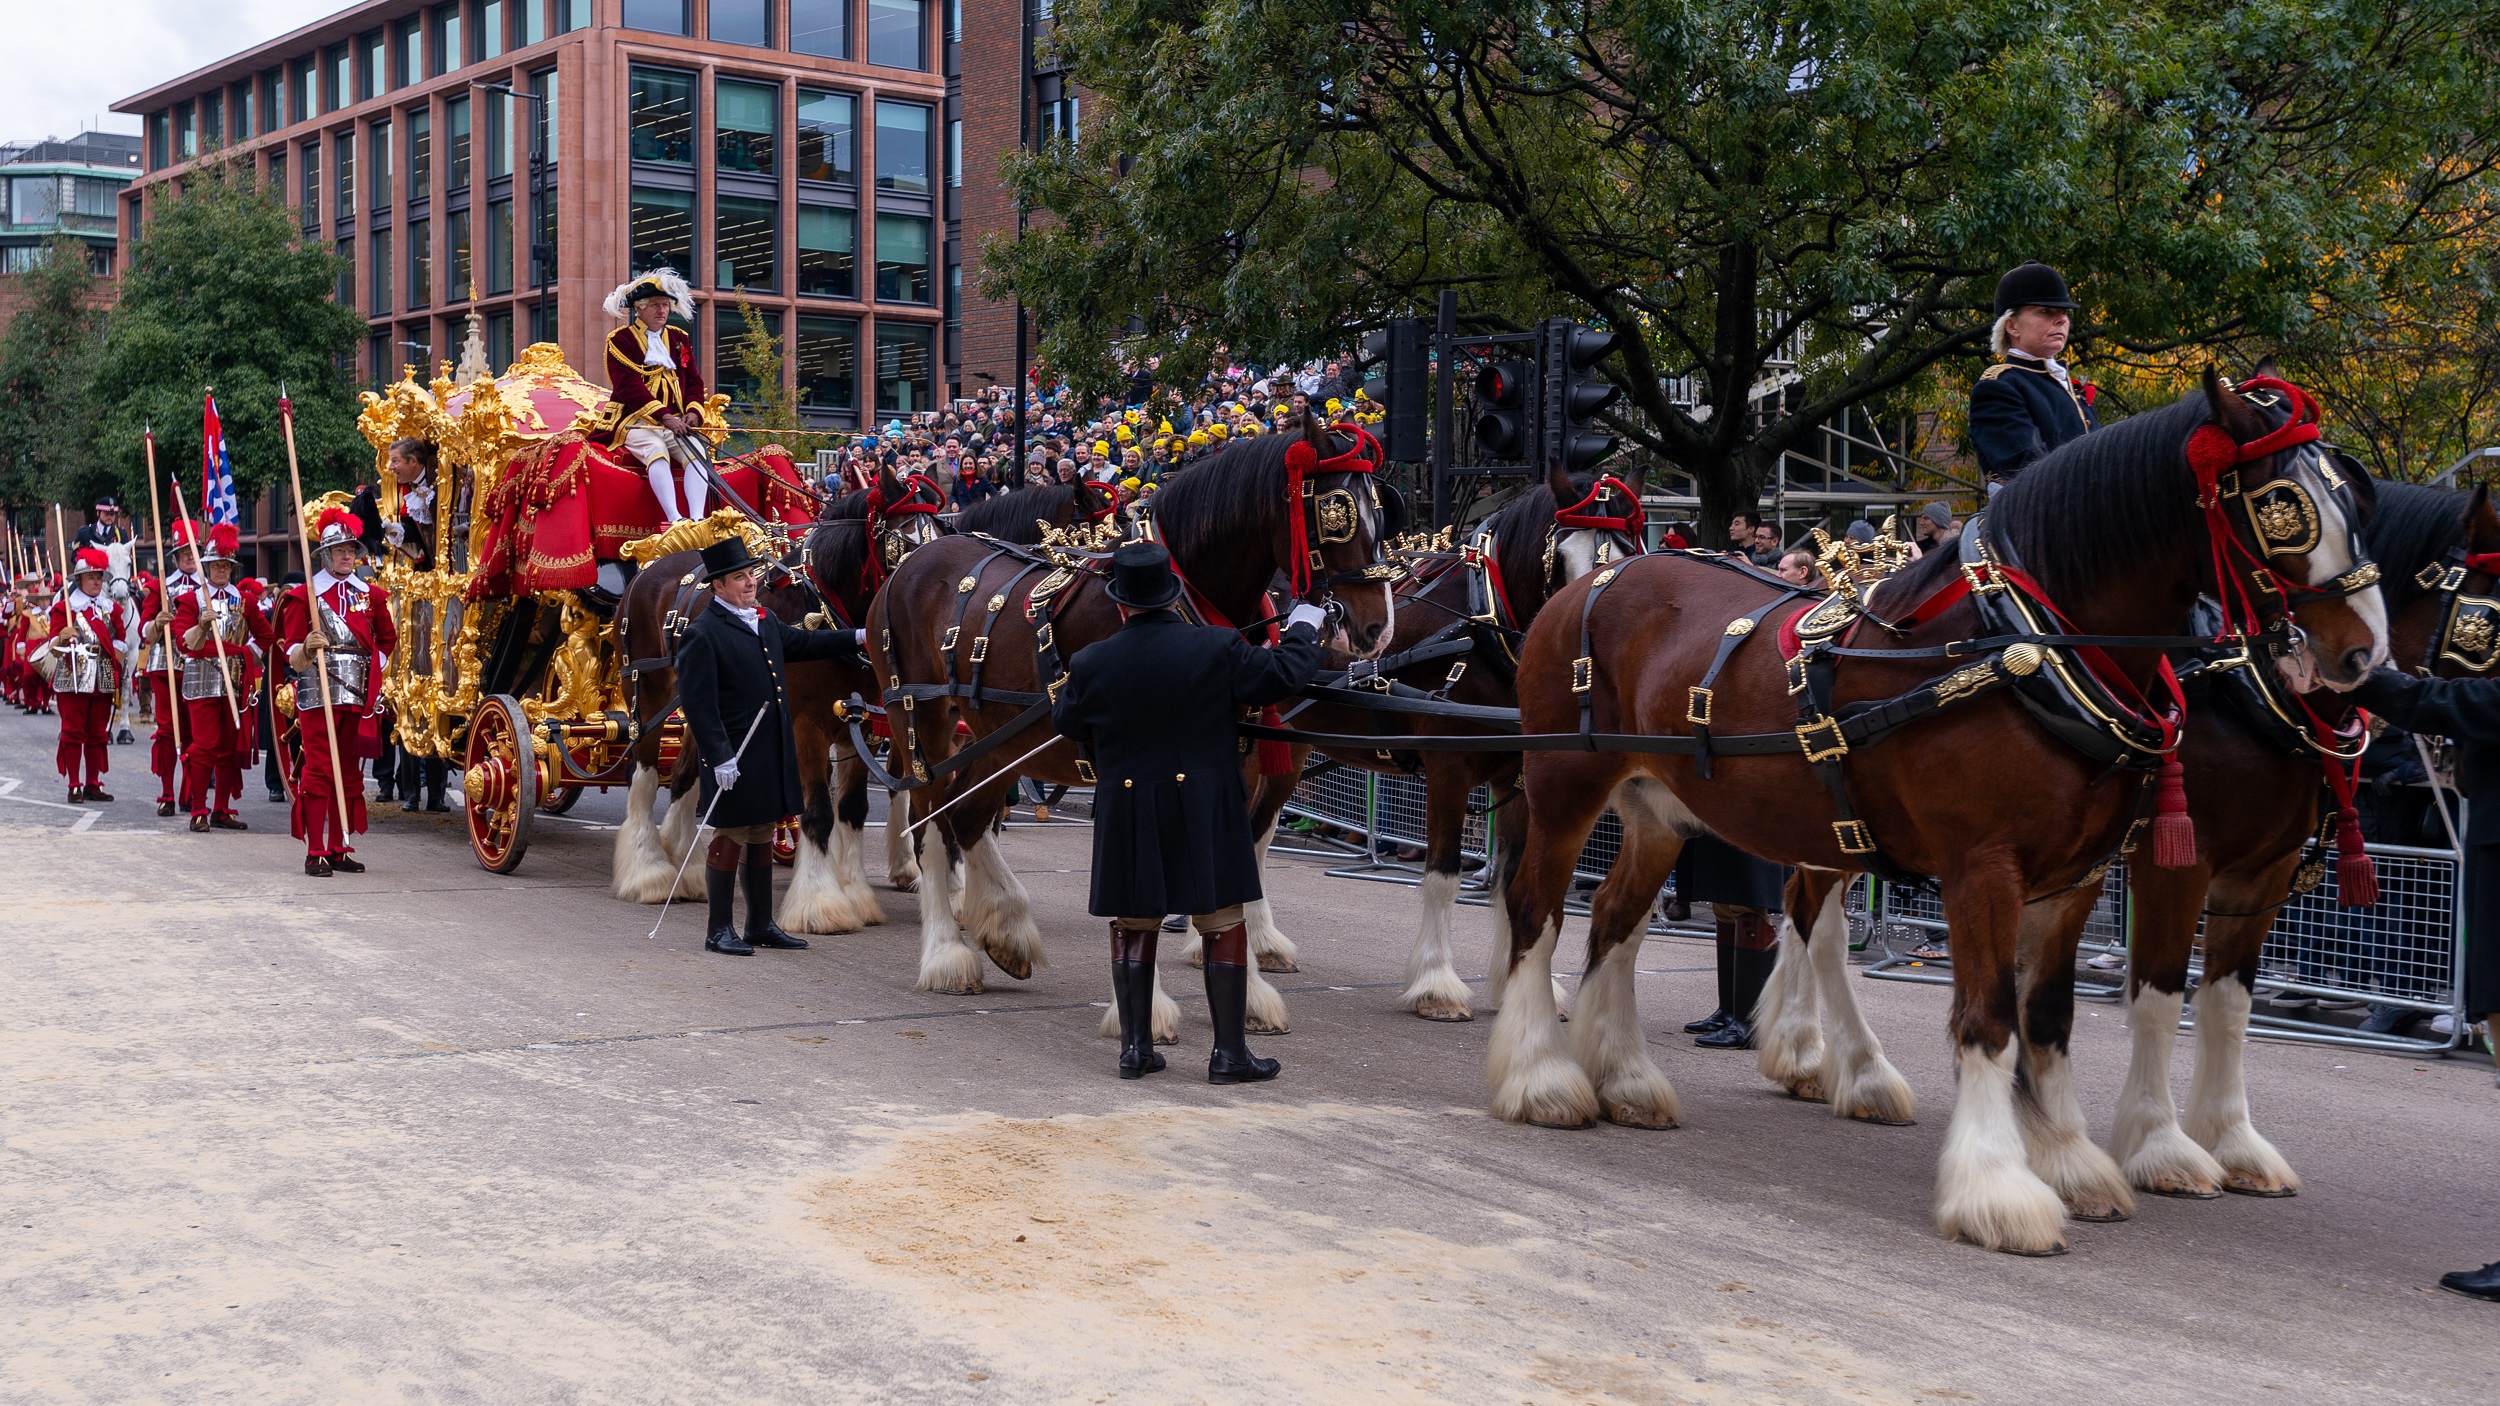 The procession for the Lord Mayor's Show with horses pulling a large golden carriage